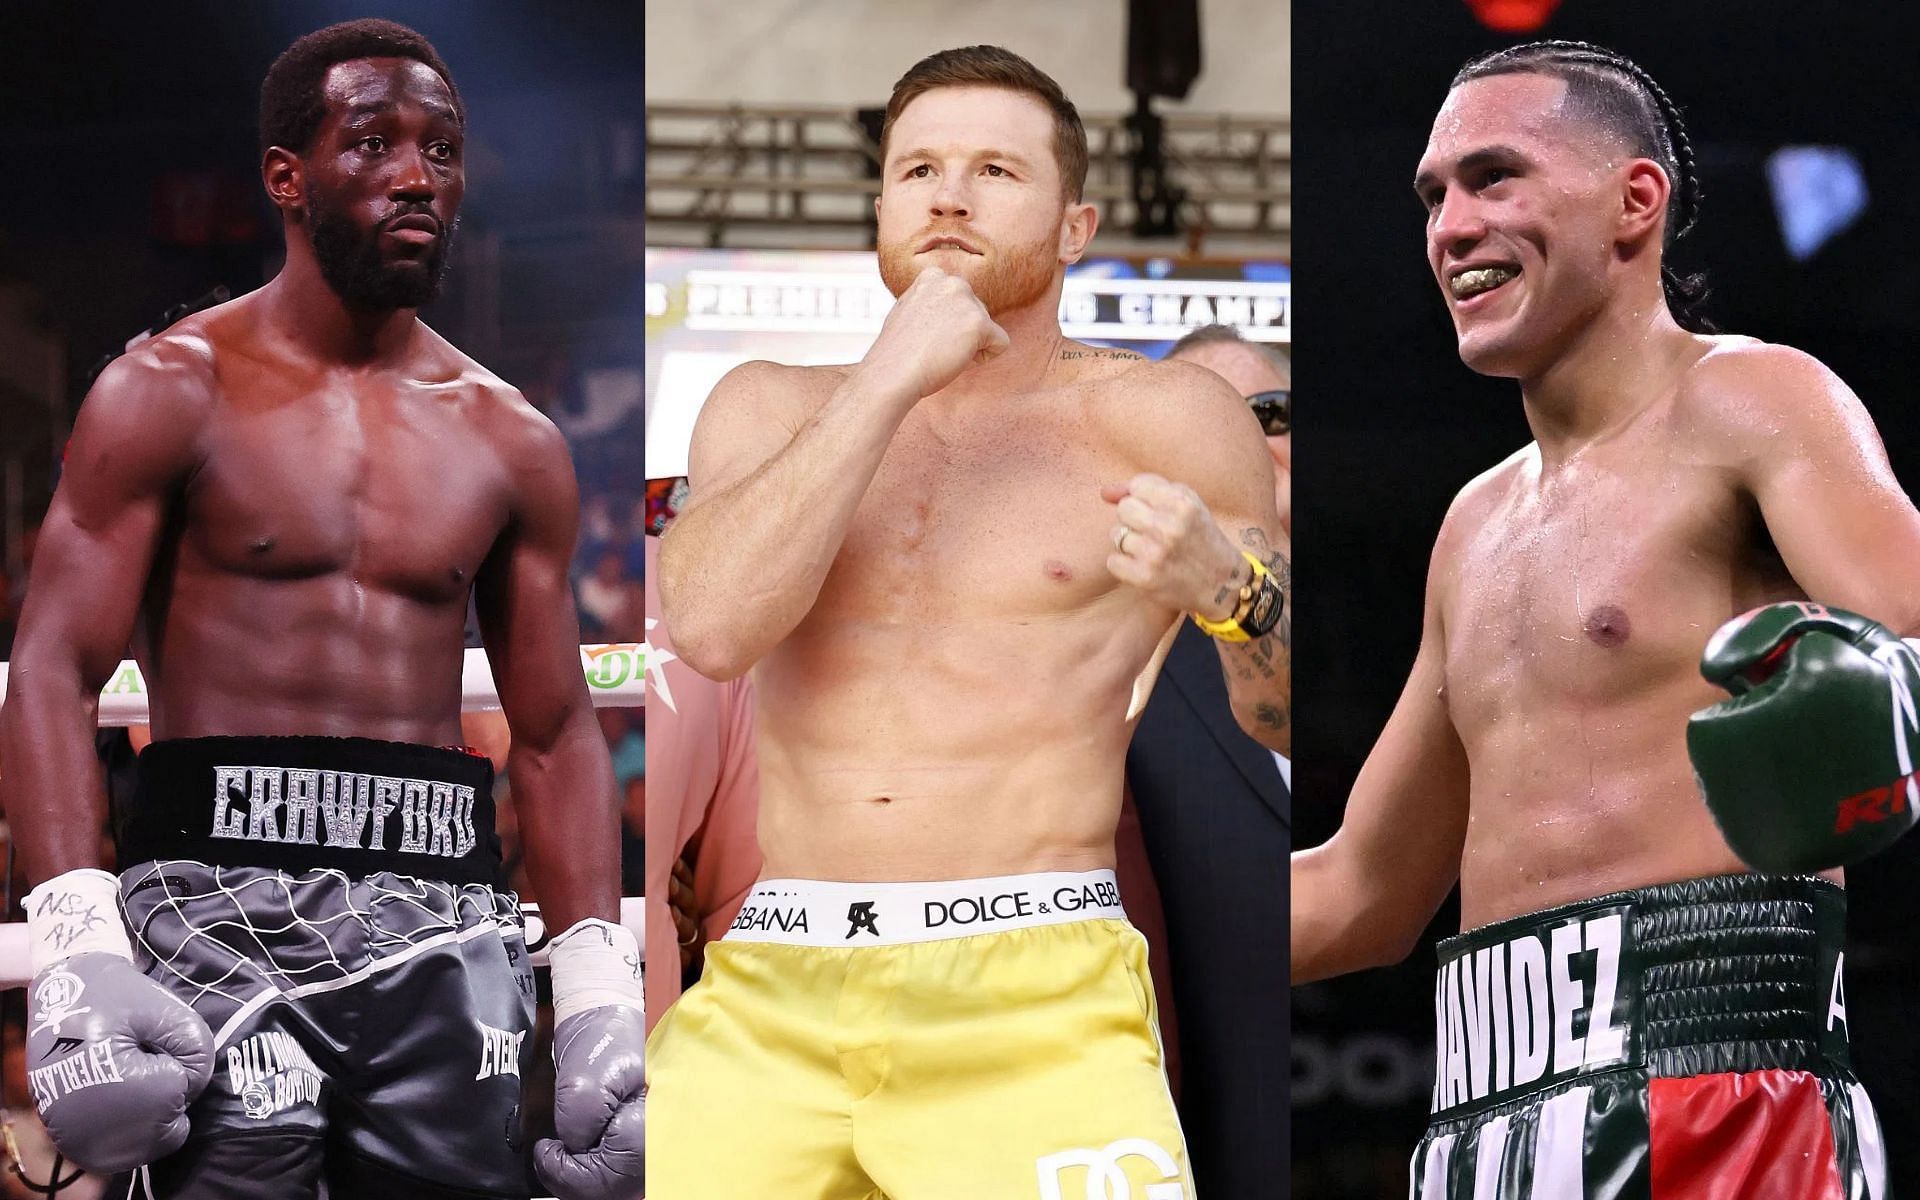 Canelo Alvarez (middle) could face either Terence Crawford (left) or David Benavidez (right) next, according to Michael Benson [Images Courtesy: @GettyImages]